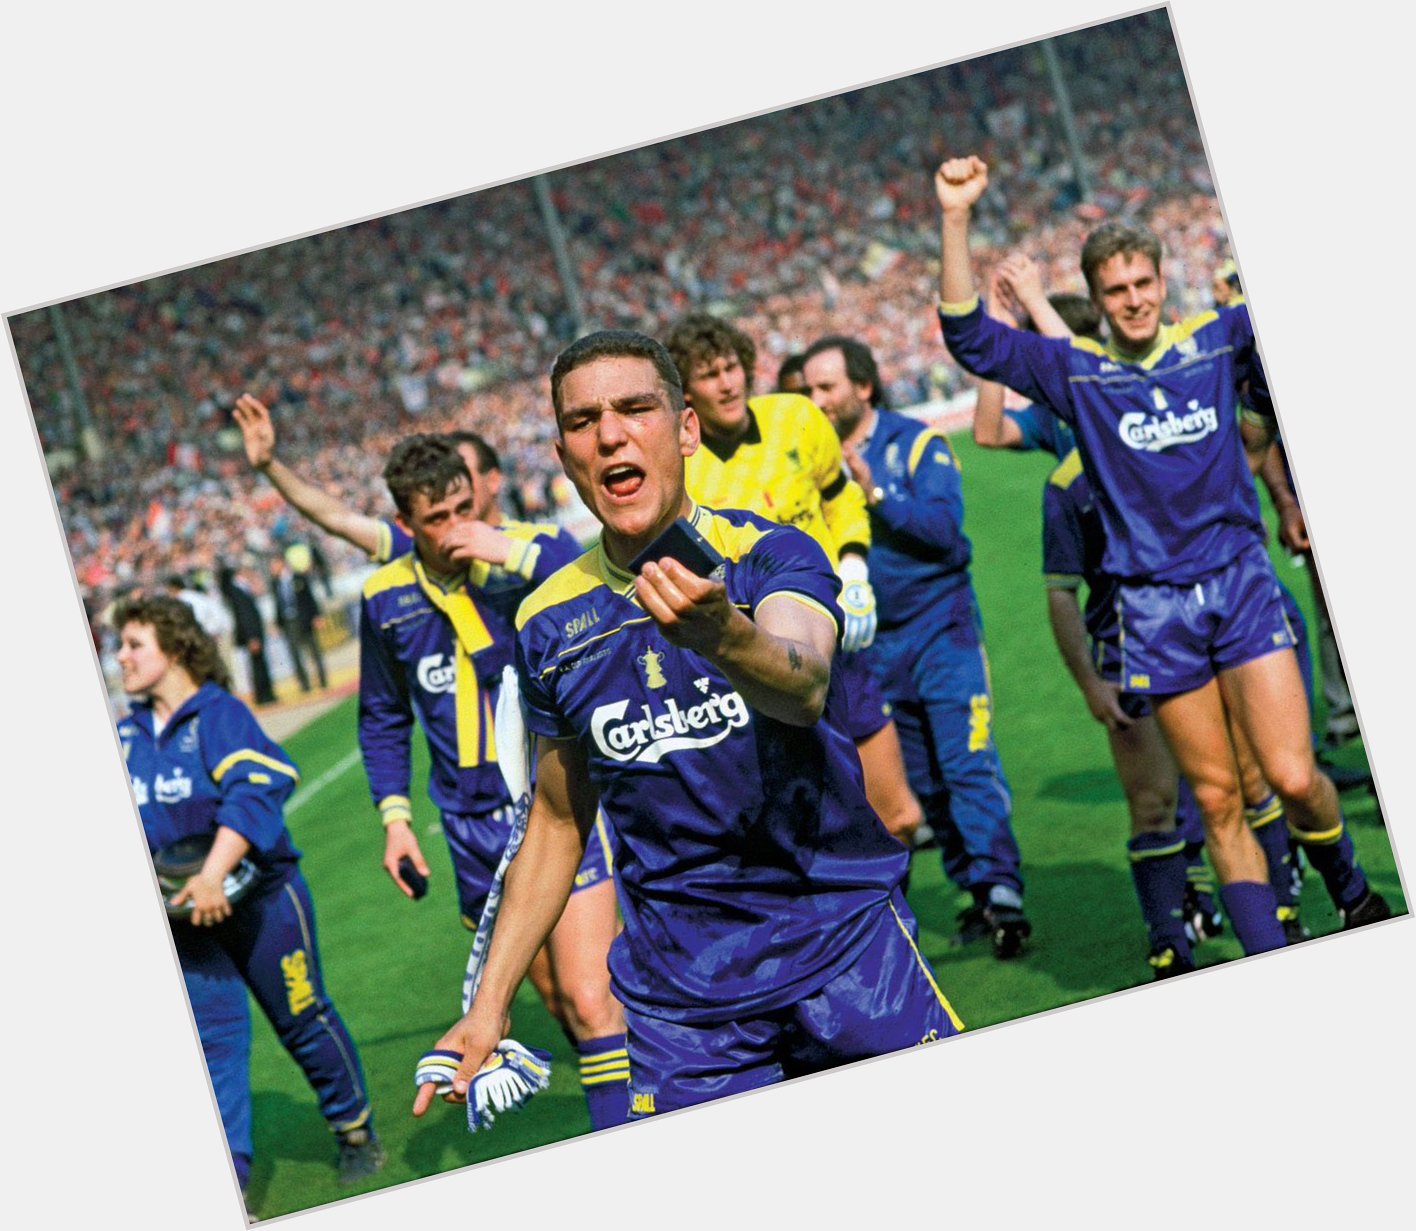 Happy birthday to one of the Crazy Gang - Vinnie Jones turns 56 today 